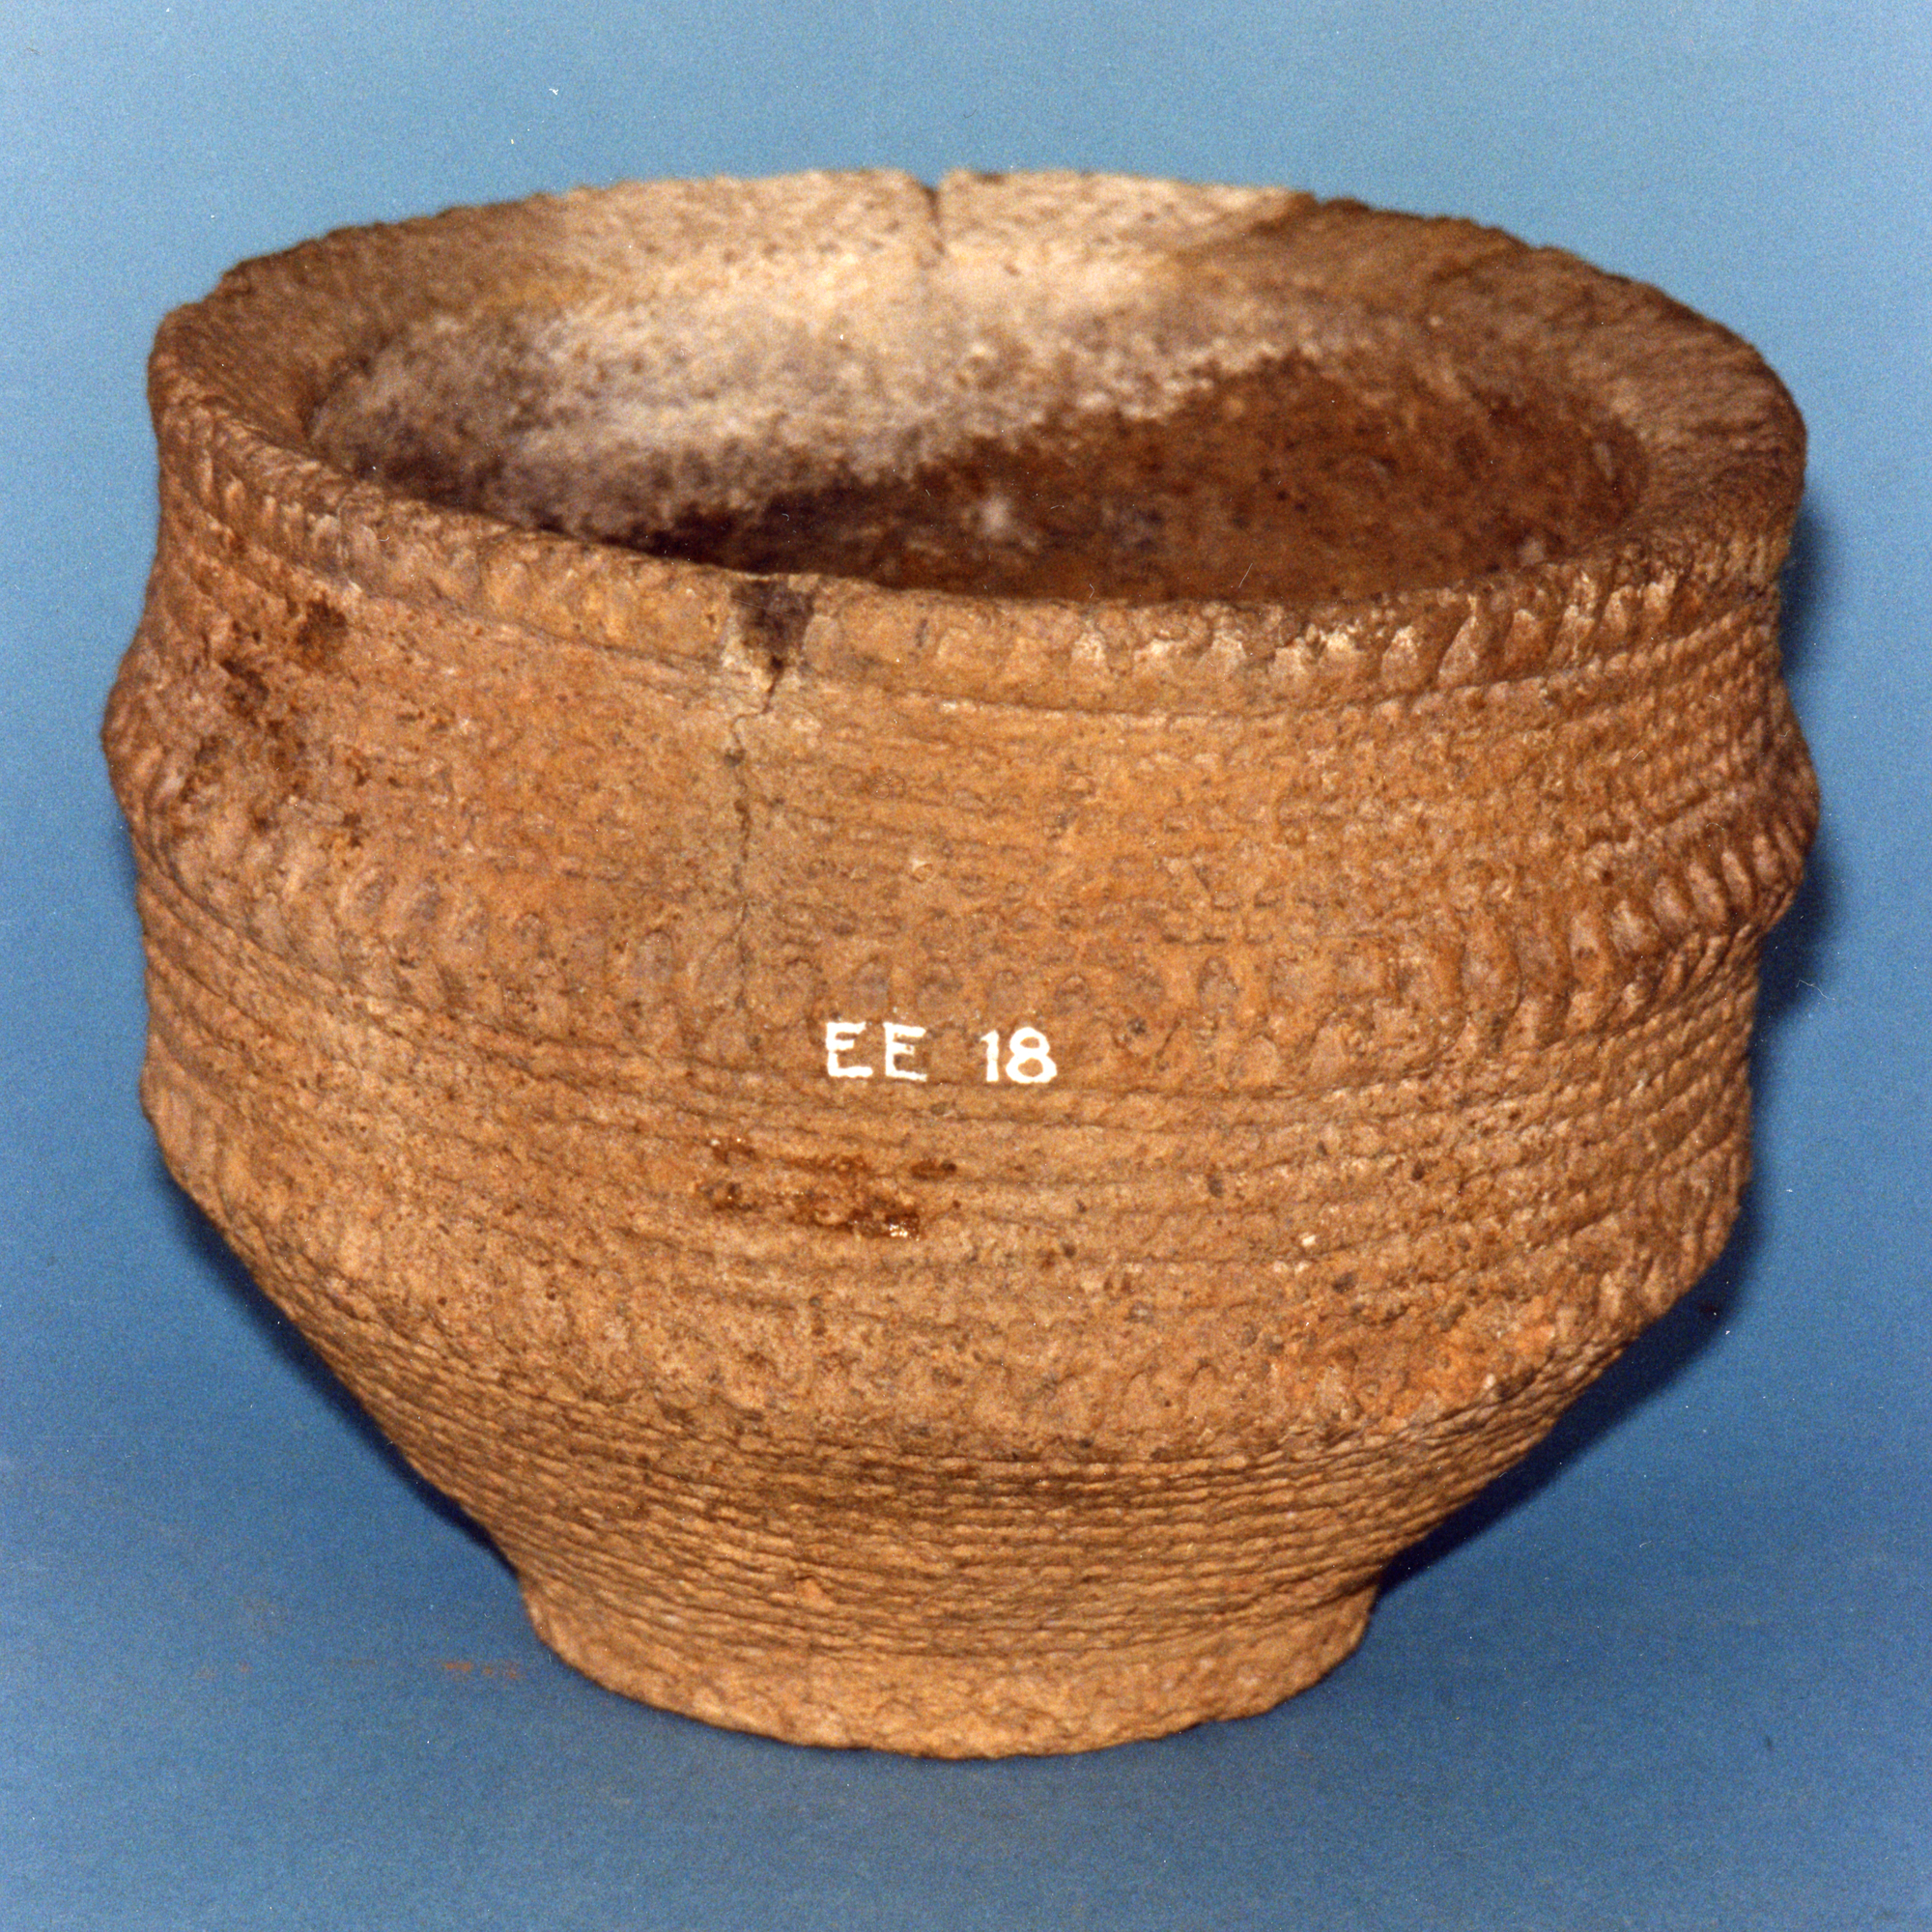 Image of Food vessel with parallel lines of impressed ornament and triangular indentations, found at Chlendry Farm, Lochinch, Wigtownshire, Early Bronze Age, 2200 - 1650 BC © National Museums Scotland